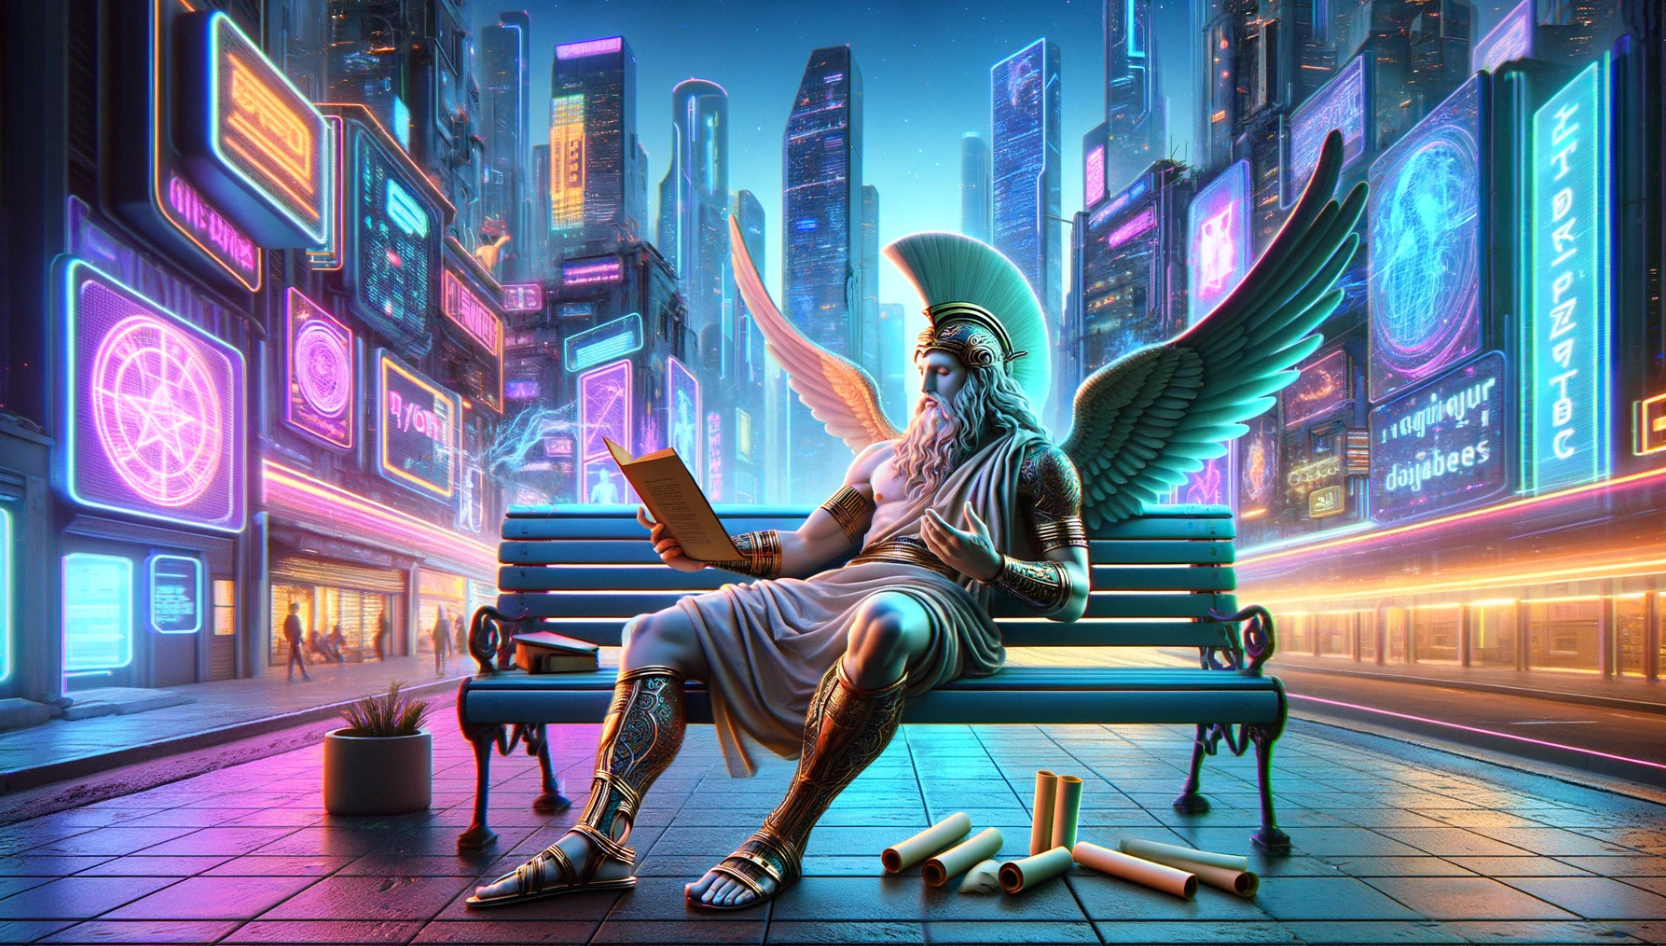 A statue of a man with wings is sitting on a bench in a futuristic city.